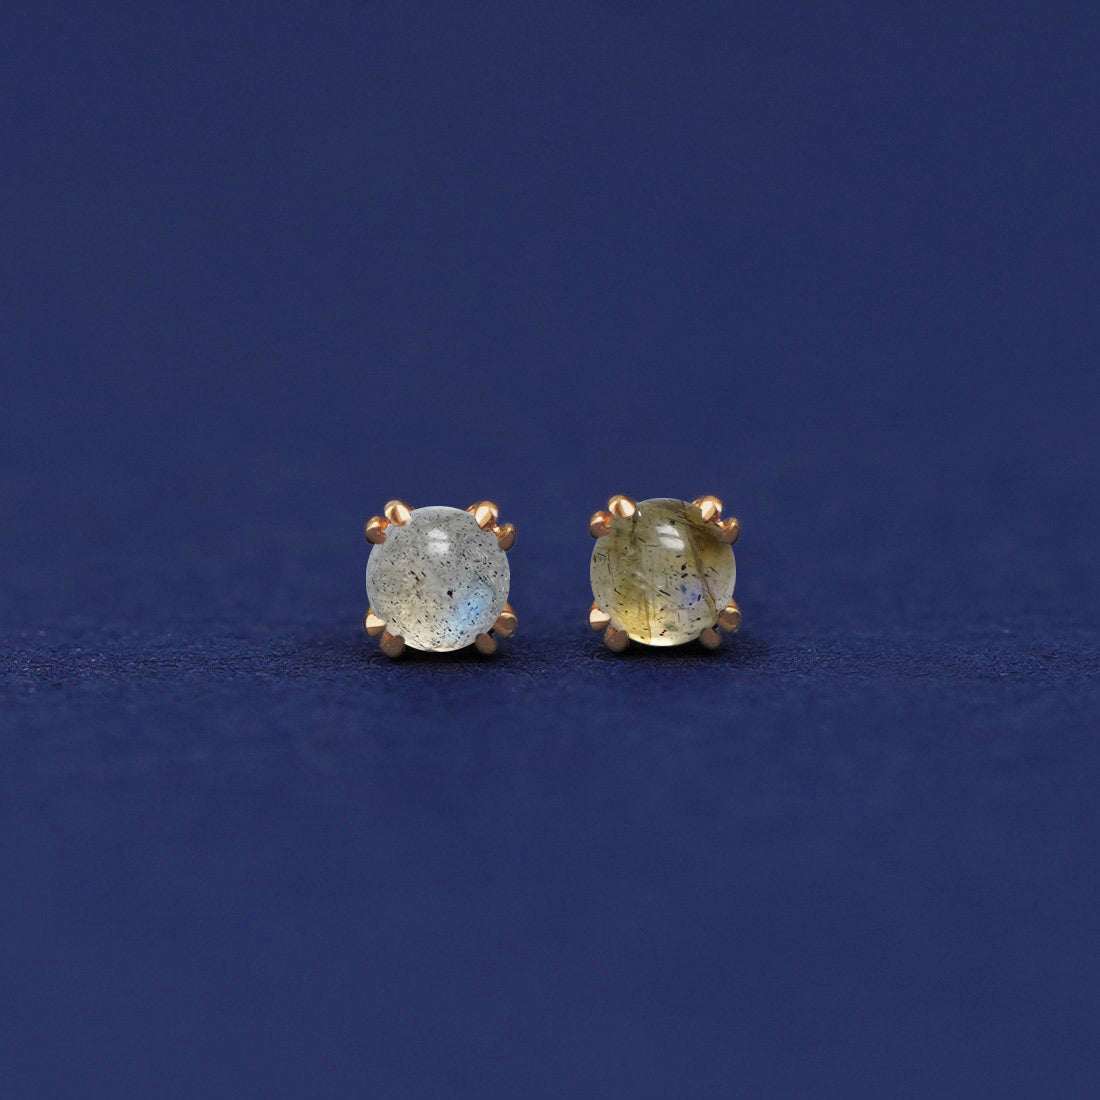 A pair of 14 karat gold stud earrings with 3 millimeter round Labradorites on a dark blue background